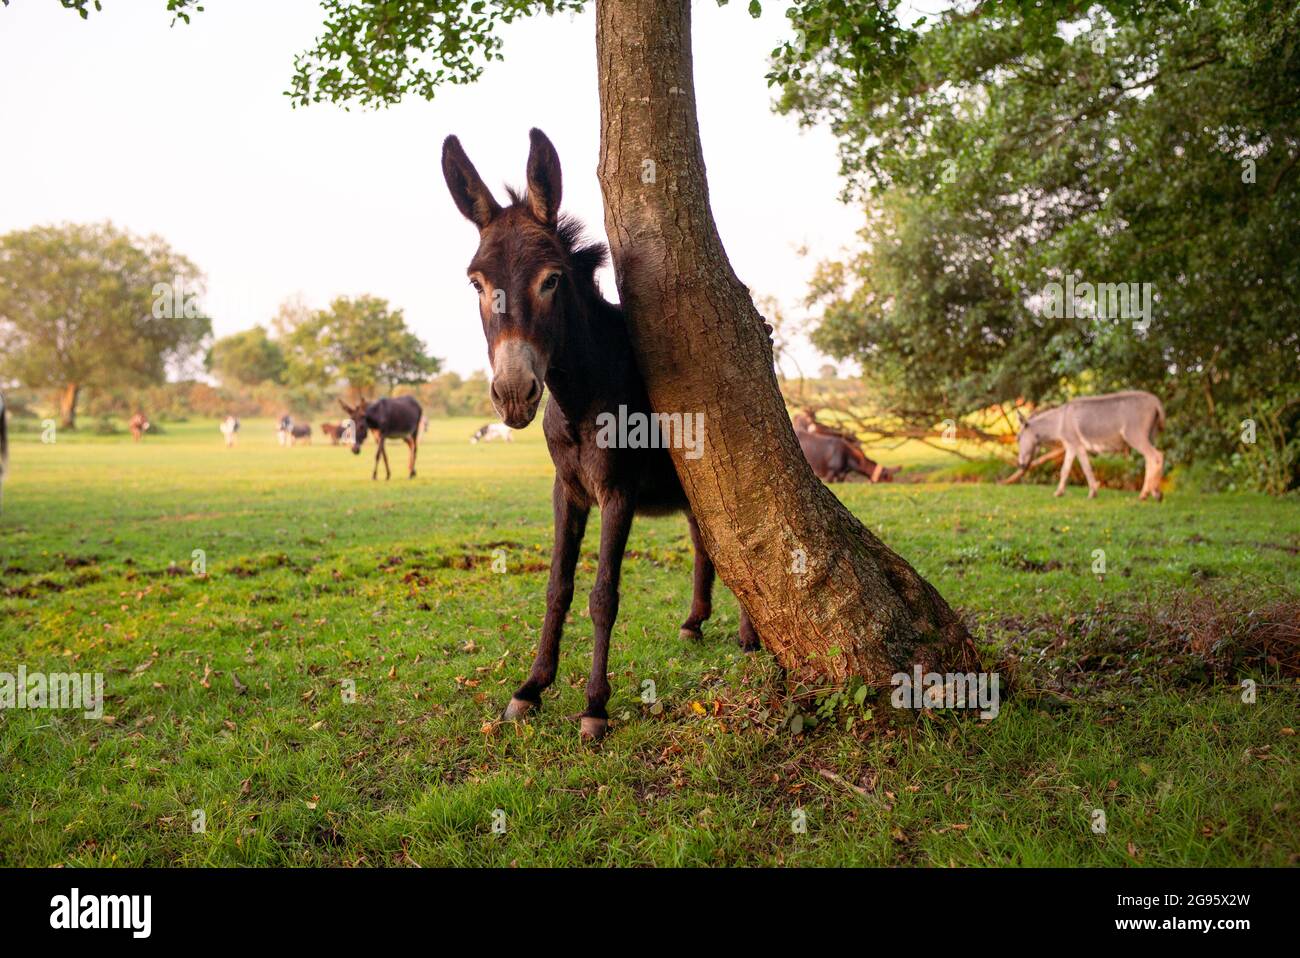 A donkey uses a tree to have a scratch on in the New Forest Hampshire England. Stock Photo